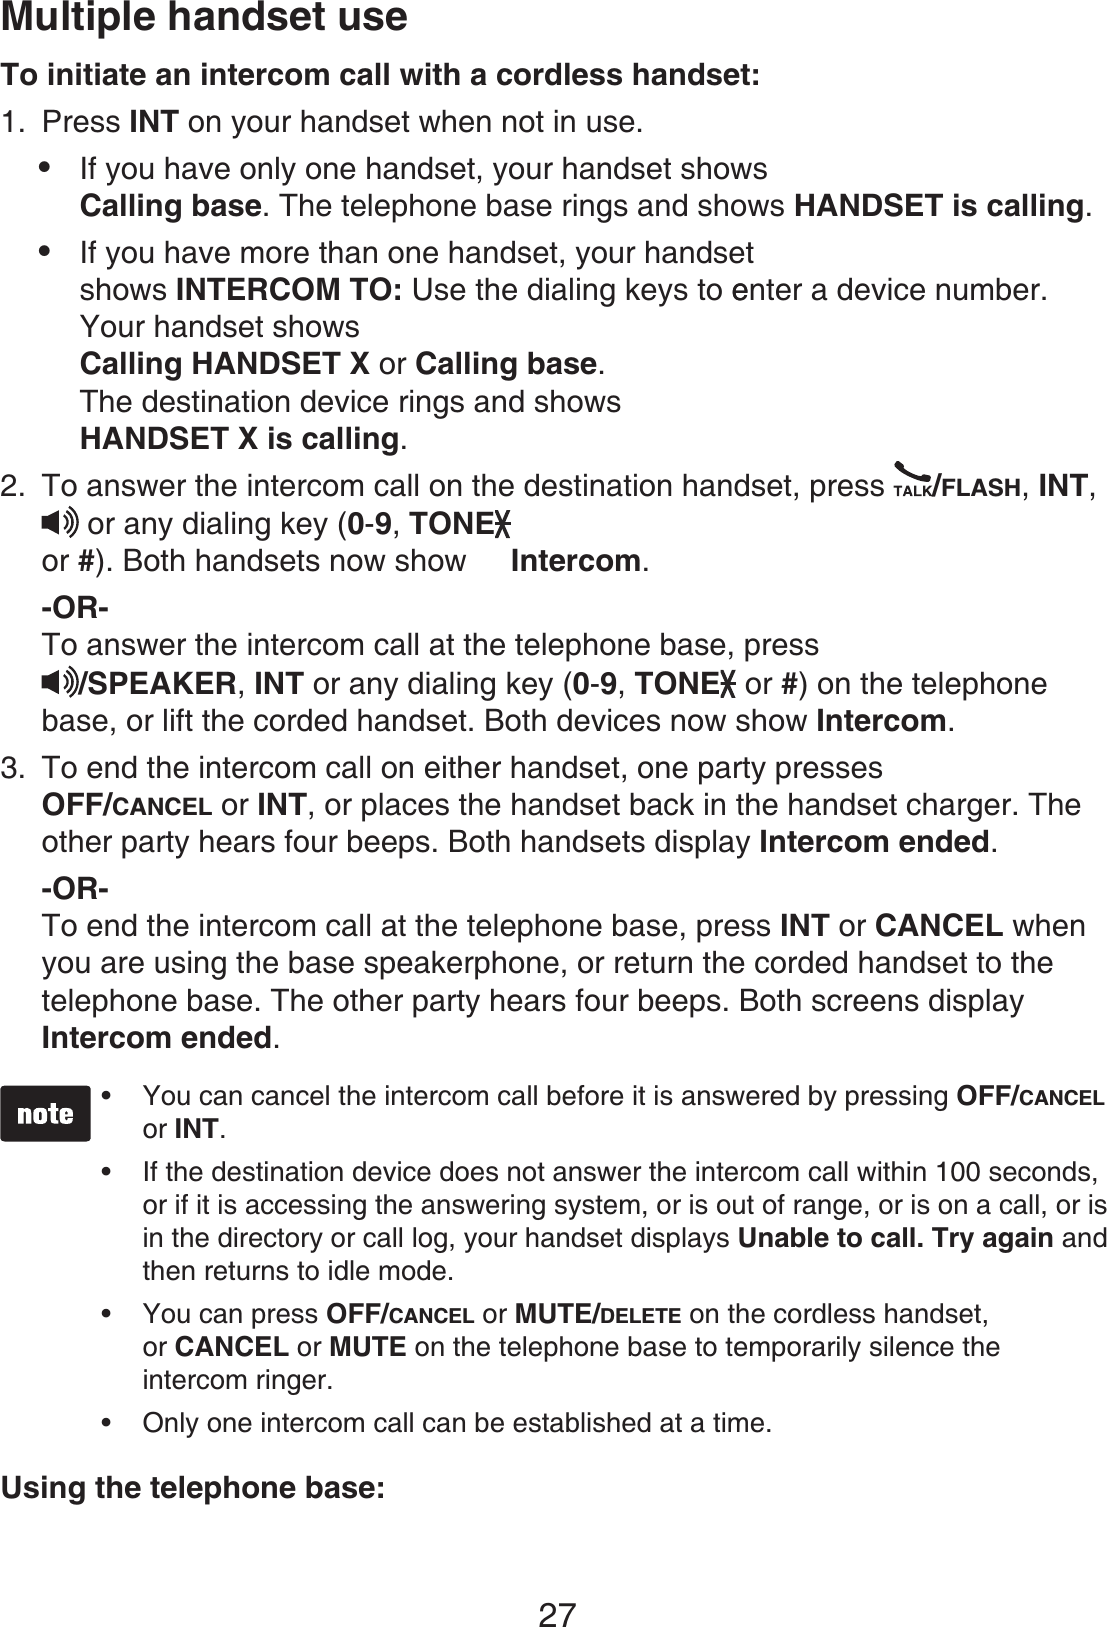 27Multiple handset useTo initiate an intercom call with a cordless handset:Press INT on your handset when not in use.If you have only one handset, your handset shows Calling base. The telephone base rings and shows HANDSET is calling.If you have more than one handset, your handset shows INTERCOM TO: Use the dialing keys to eenter a device number.Your handset showsCalling HANDSET X or Calling base.The destination device rings and shows HANDSET X is calling.To answer the intercom call on the destination handset, press  /FLASH,INT,or any dialing key (0-9,TONEor #). Both handsets now show  Intercom.-OR-To answer the intercom call at the telephone base, press/SPEAKER, INT or any dialing key (0-9,TONE  or #) on the telephone base, or lift the corded handset. Both devices now show Intercom.To end the intercom call on either handset, one party pressesOFF/CANCEL or INT, or places the handset back in the handset charger. Theother party hears four beeps. Both handsets display Intercom ended.-OR-To end the intercom call at the telephone base, press INT or CANCEL whenyou are using the base speakerphone, or return the corded handset to the telephone base. The other party hears four beeps. Both screens display Intercom ended.You can cancel the intercom call before it is answered by pressing OFF/CANCELor INT.If the destination device does not answer the intercom call within 100 seconds,or if it is accessing the answering system, or is out of range, or is on a call, or is in the directory or call log, your handset displays Unable to call. Try again and then returns to idle mode.You can press OFF/CANCEL or MUTE/DELETE on the cordless handset, or CANCEL or MUTE on the telephone base to temporarily silence the intercom ringer. Only one intercom call can be established at a time.••••Using the telephone base:1.••2.3.